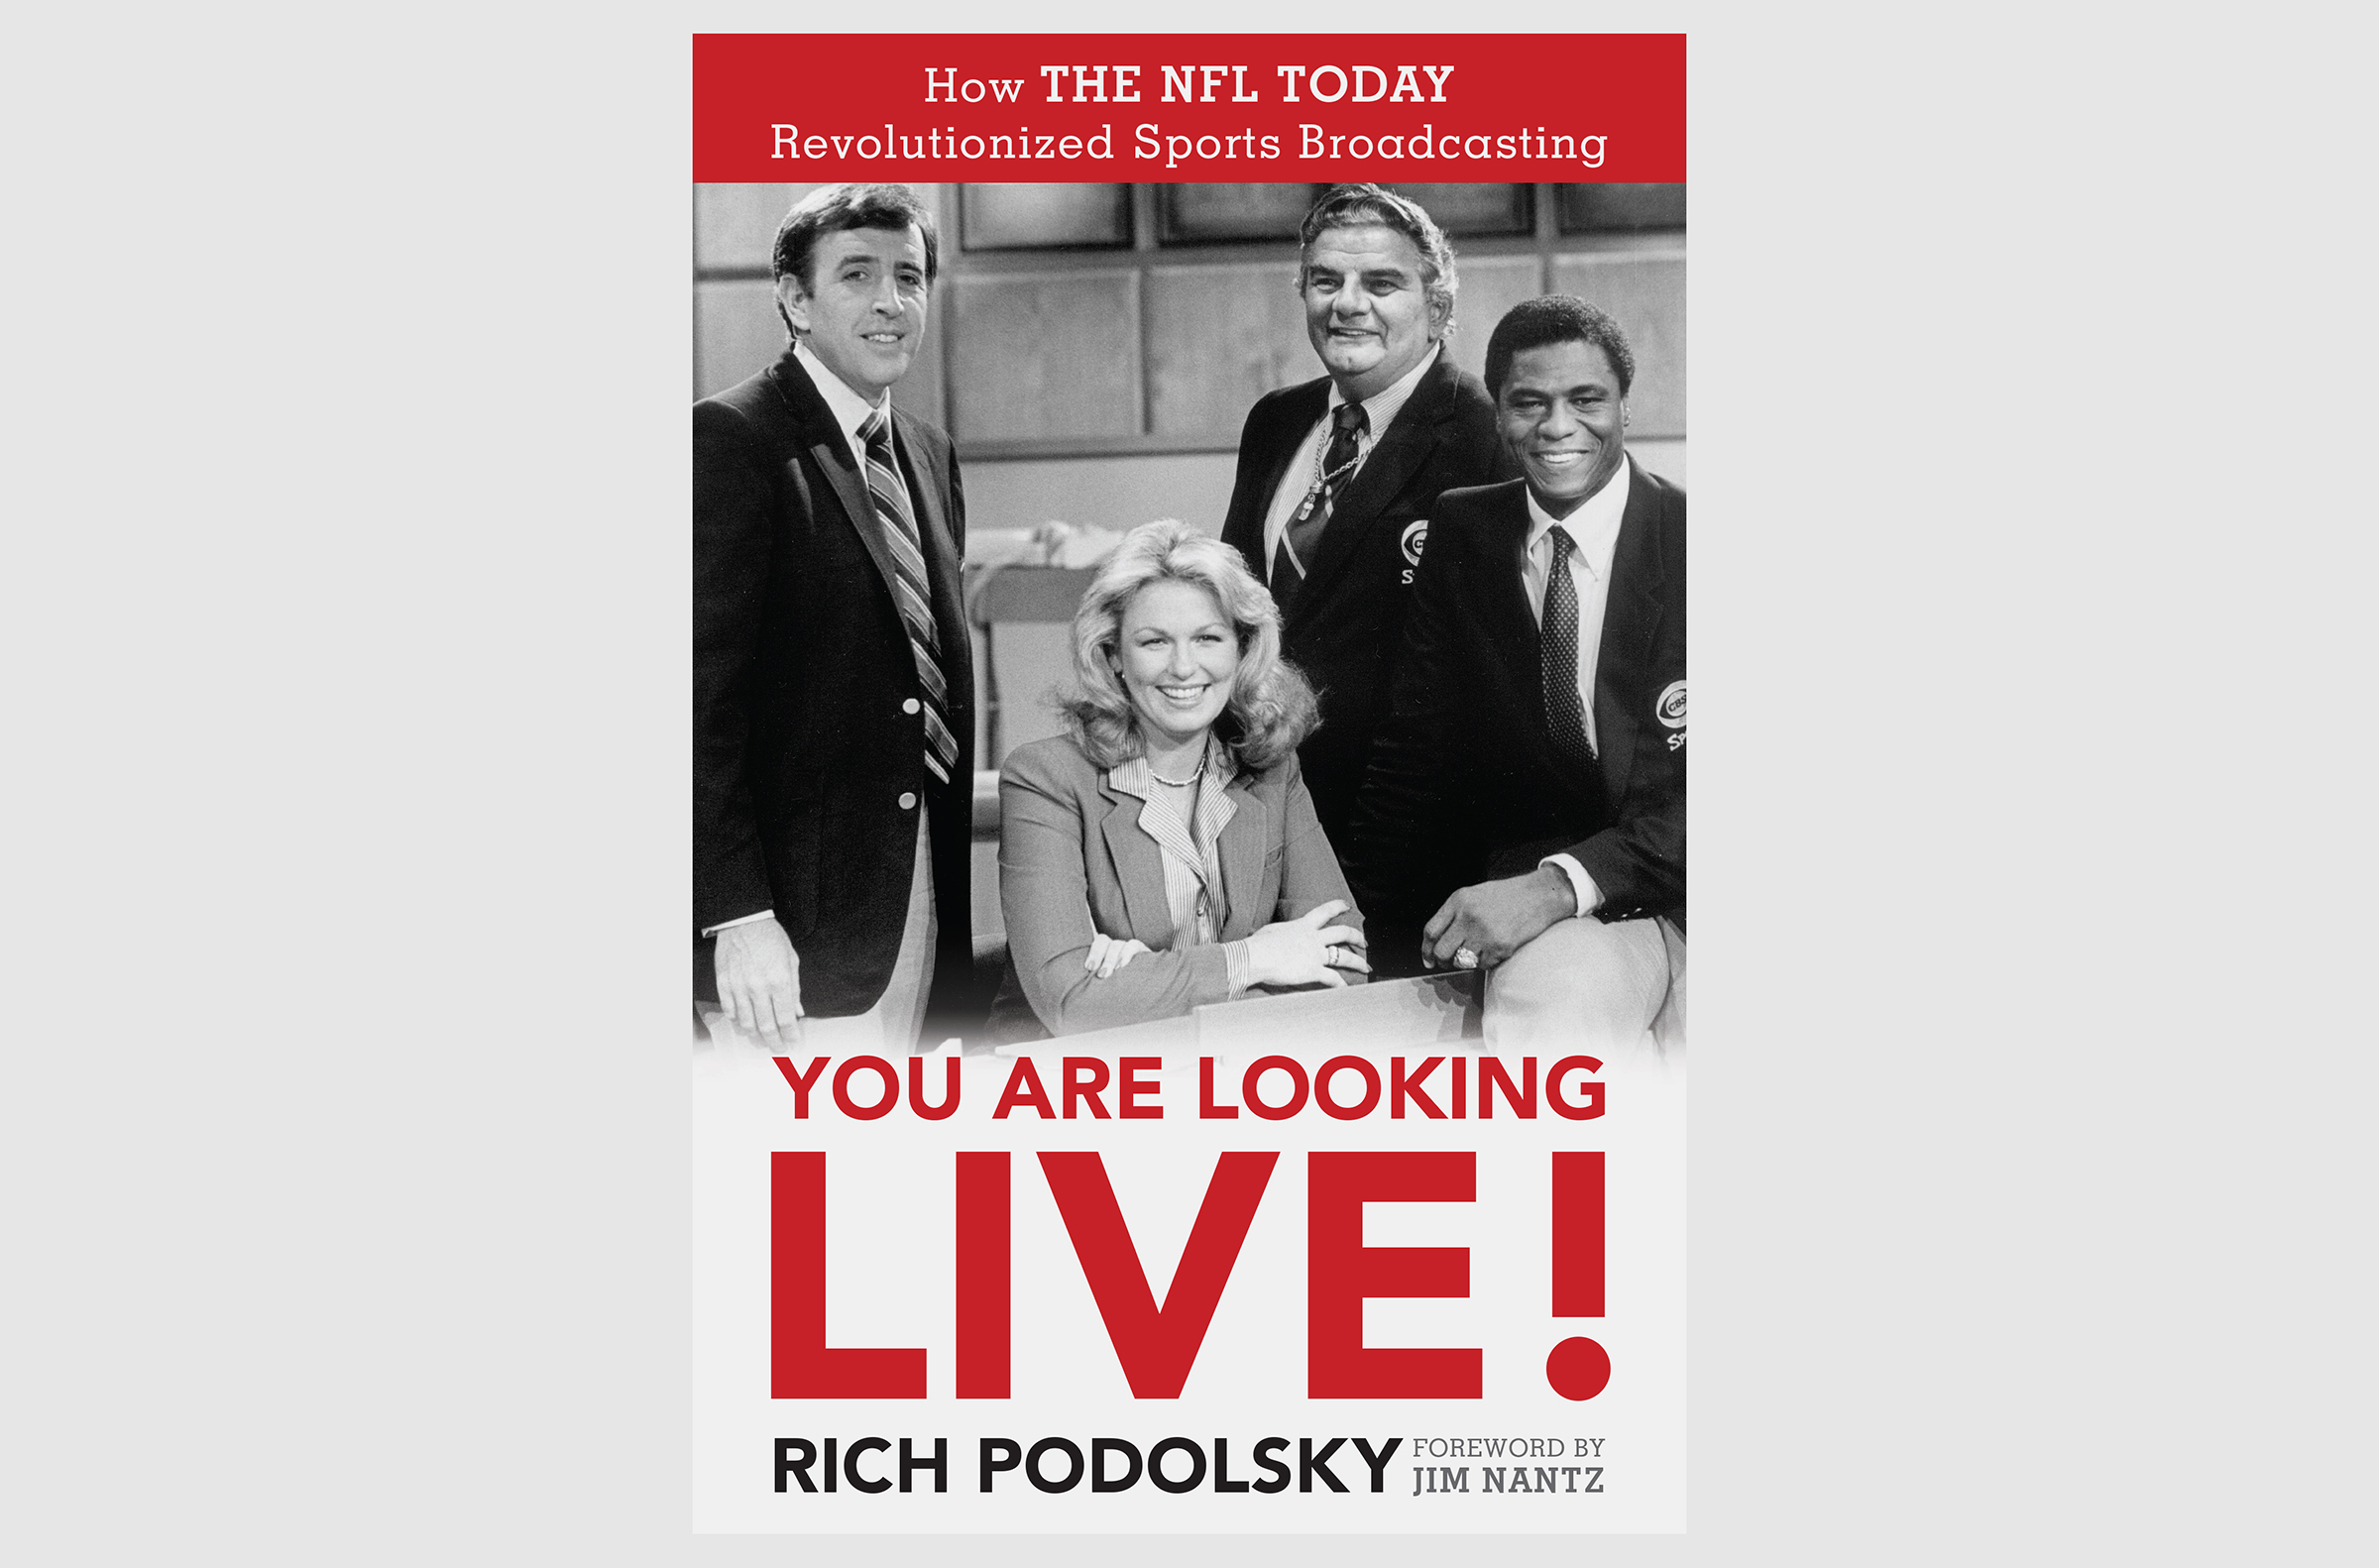 The cover of just-released "You Are Looking Live!" by Rich Podolsky